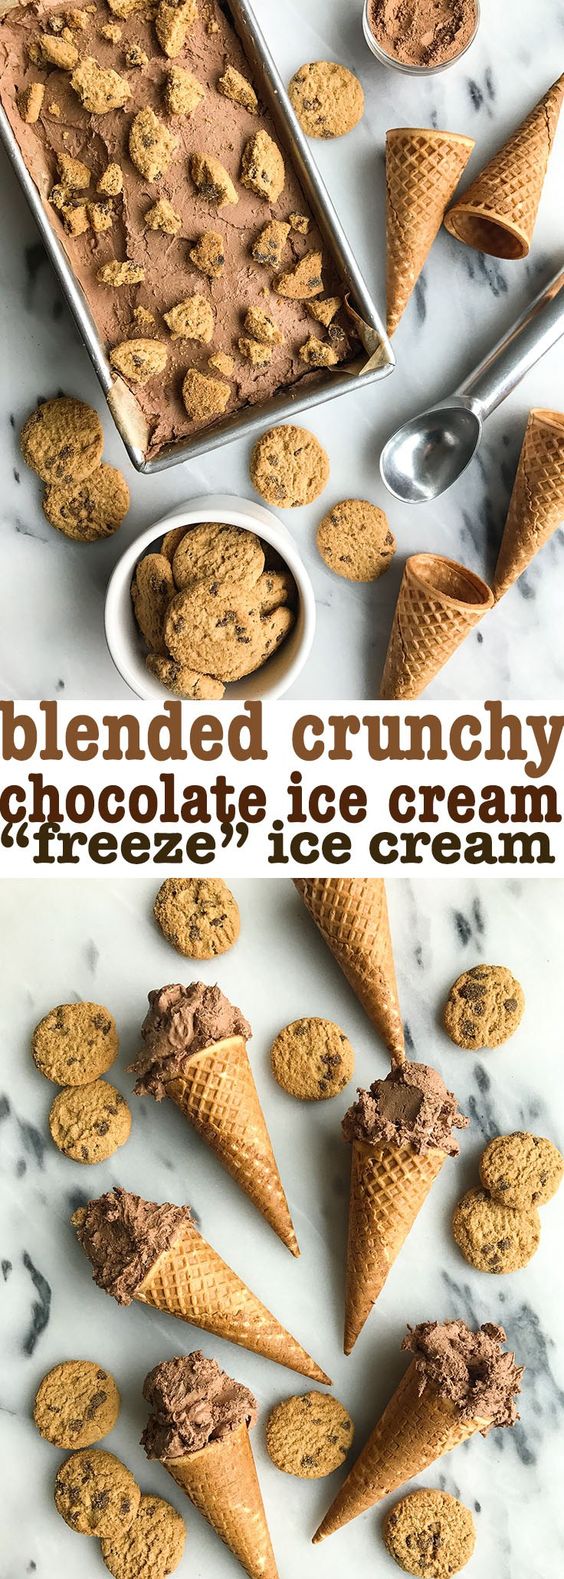 Blended Crunchy Chocolate Cookie "Freeze" Ice Cream